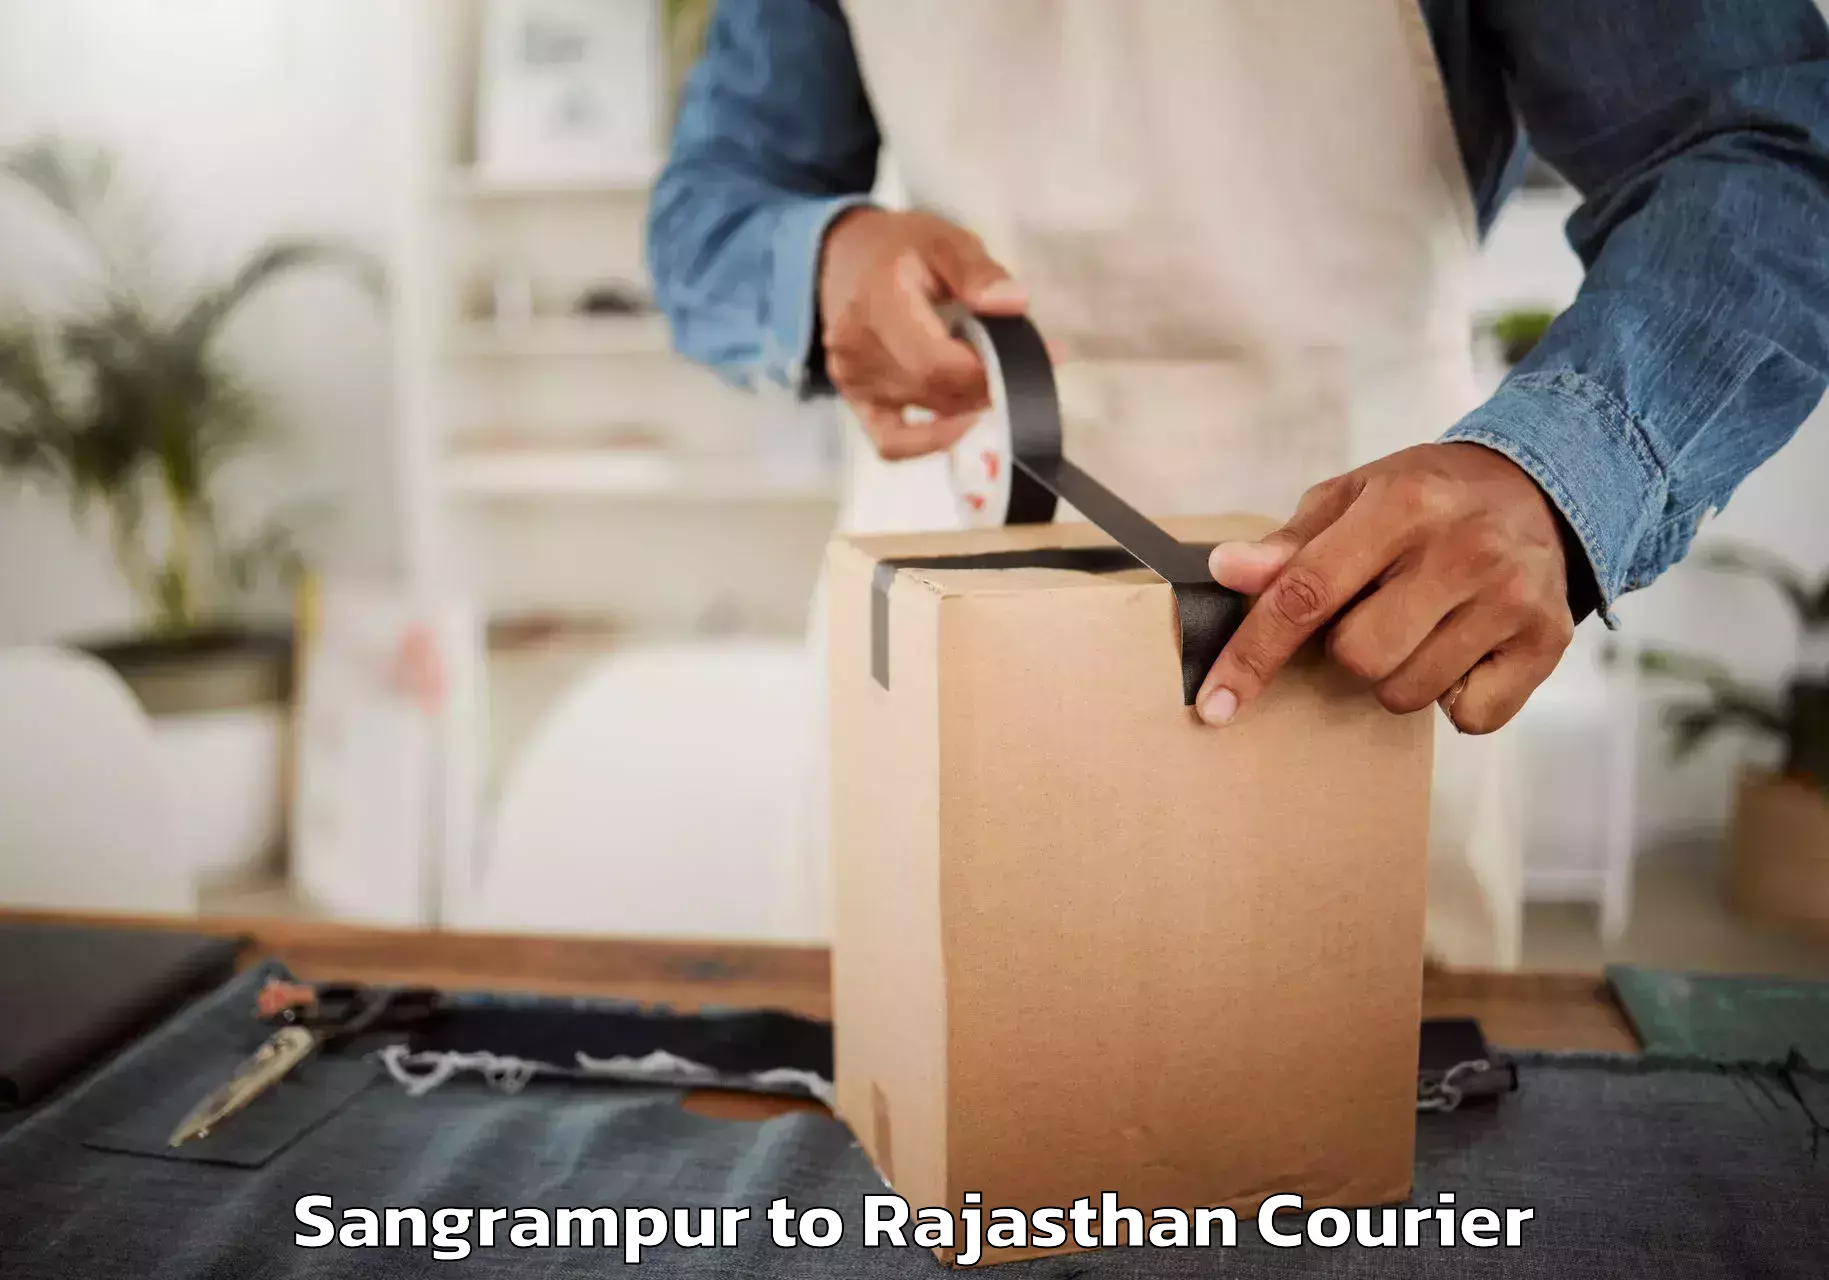 Residential moving experts Sangrampur to Suratgarh